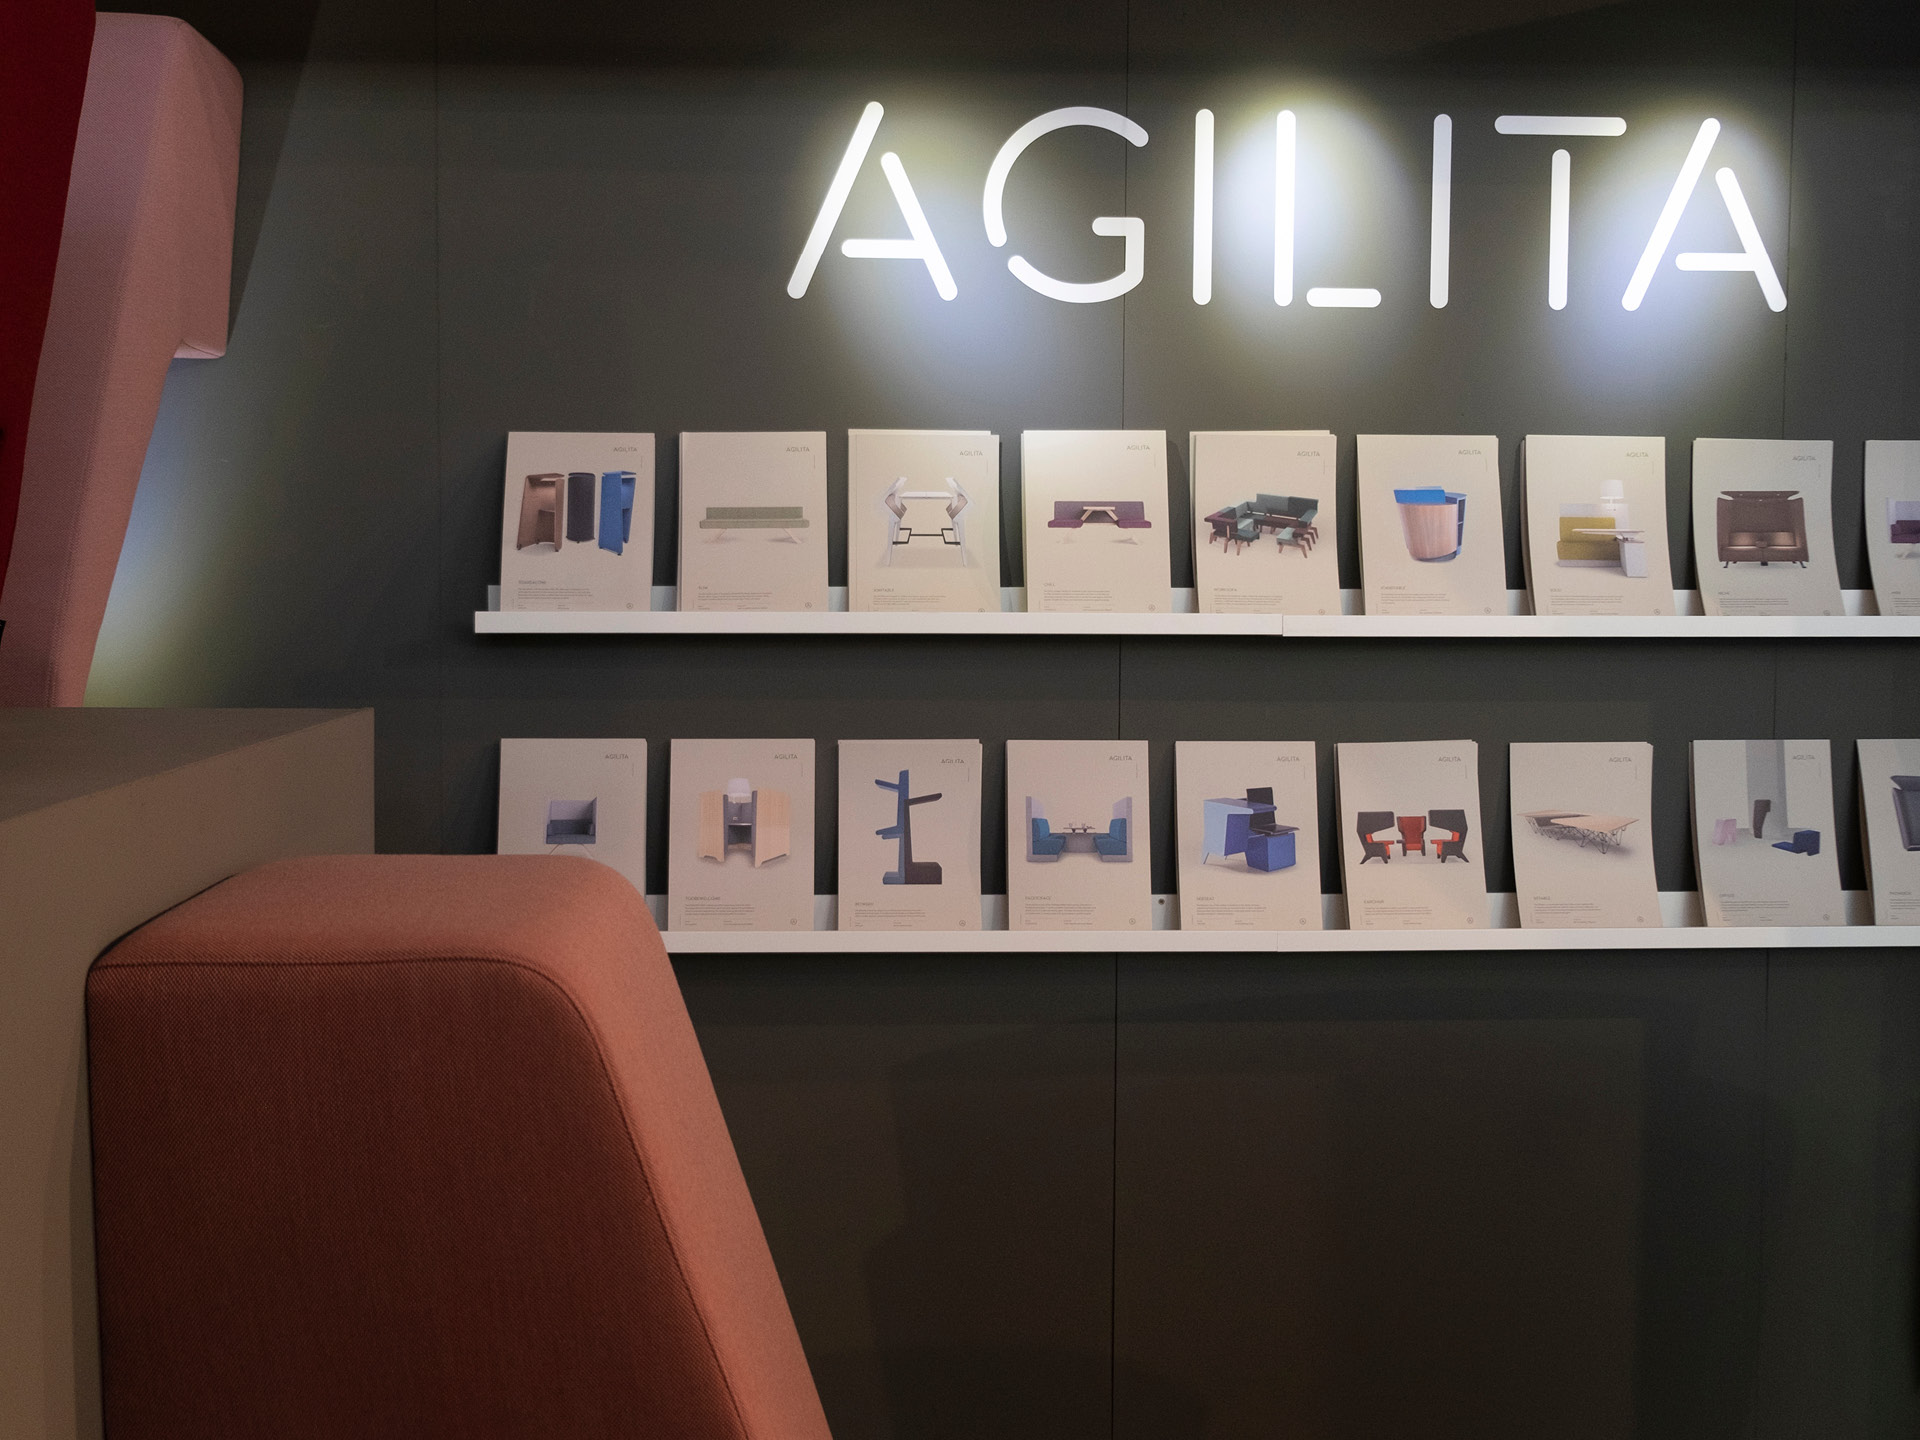 A photo of the Agilita exhibition wall with picture rail and product sheets